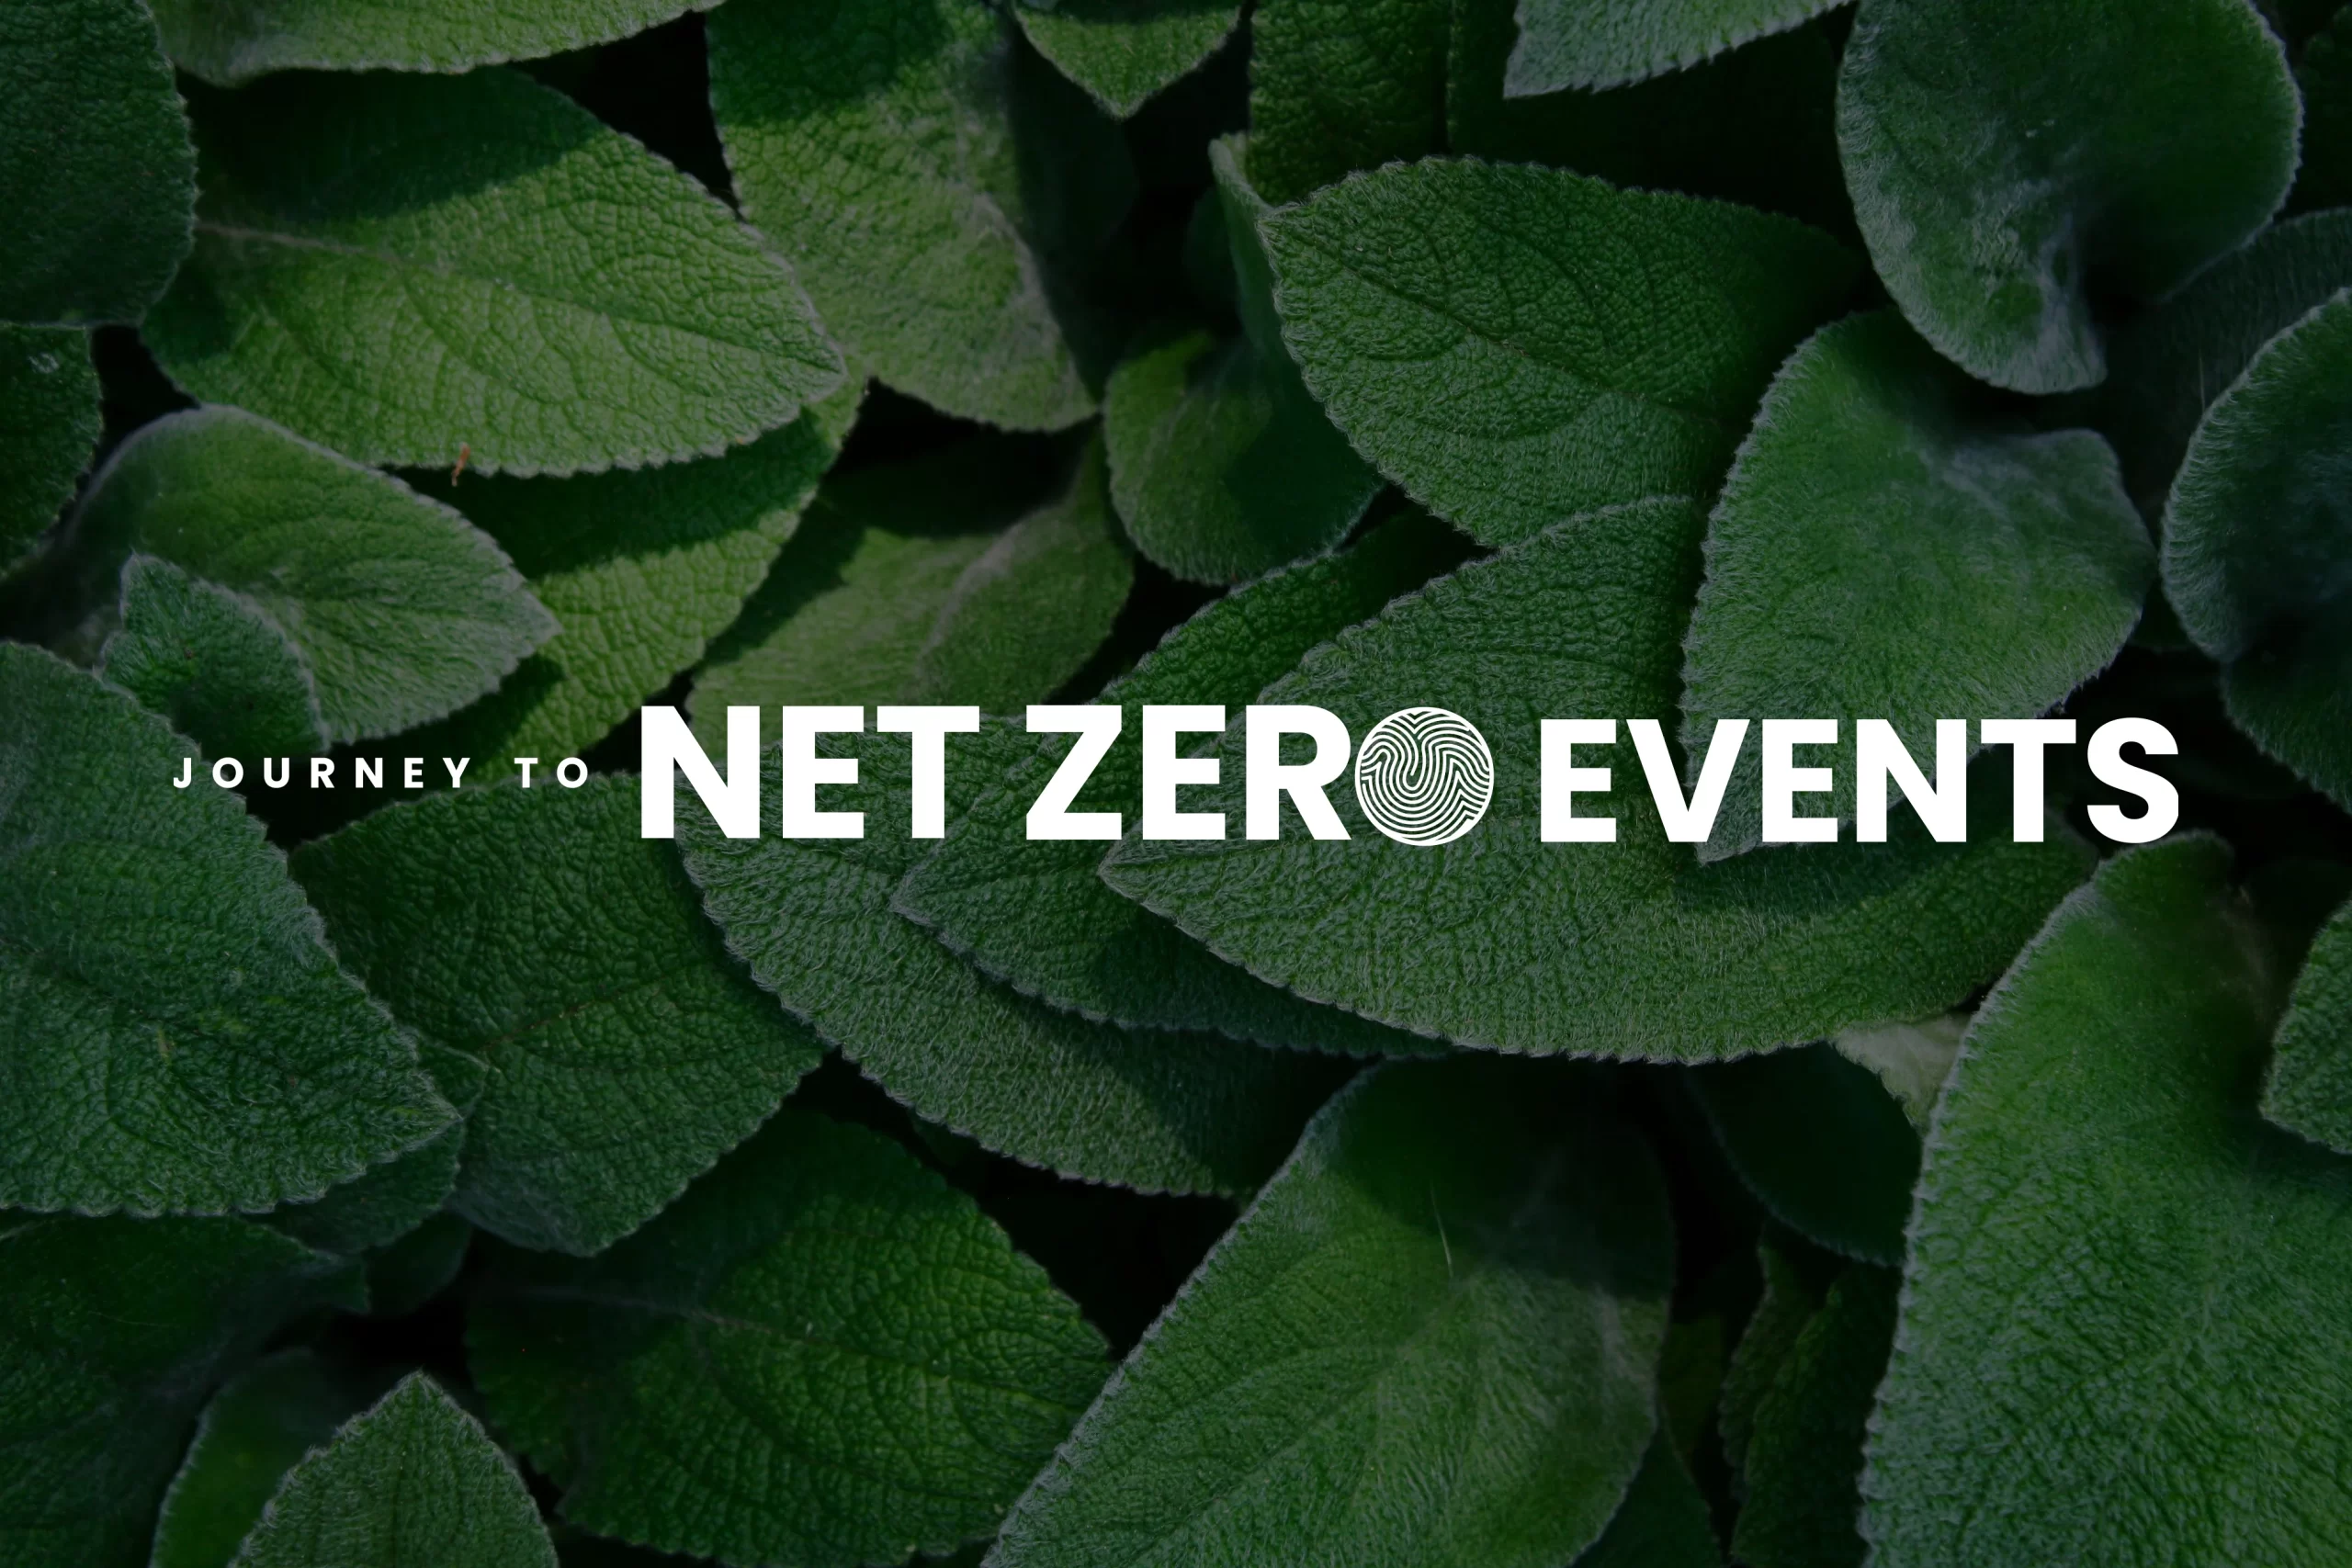 net-zero carbon emissions, corporate events, innovations, corporate sustainability